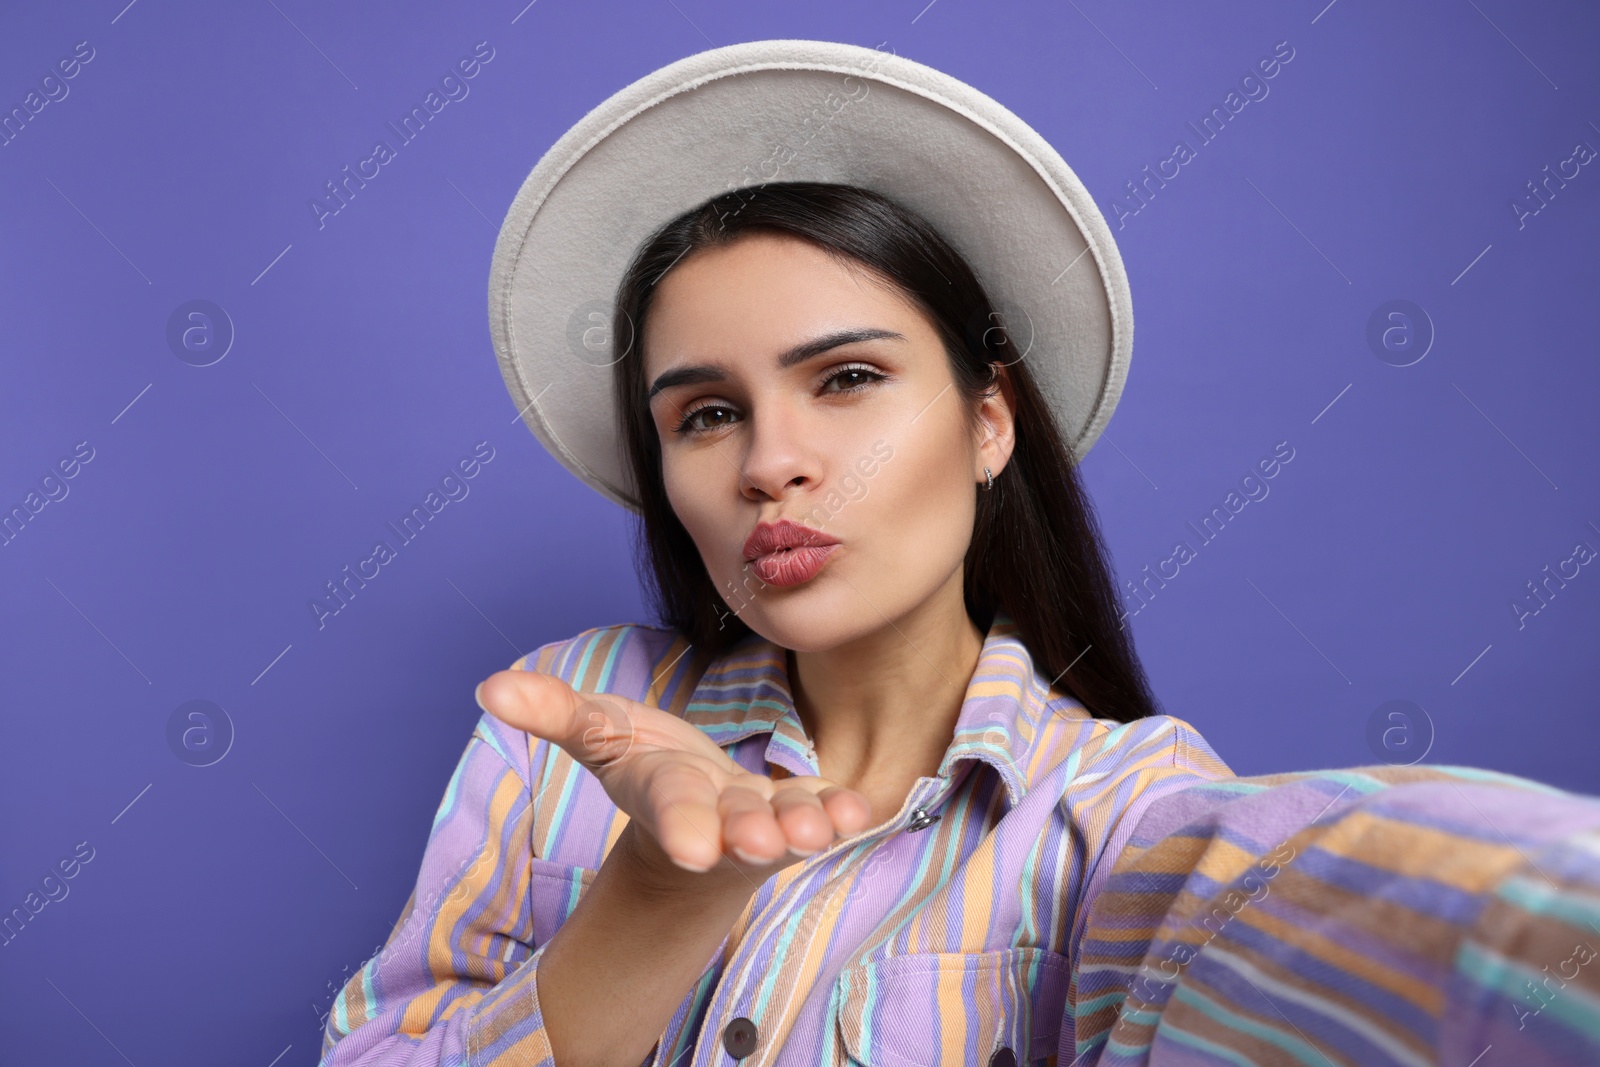 Photo of Beautiful young woman with stylish hat taking selfie while blowing kiss on purple background, closeup